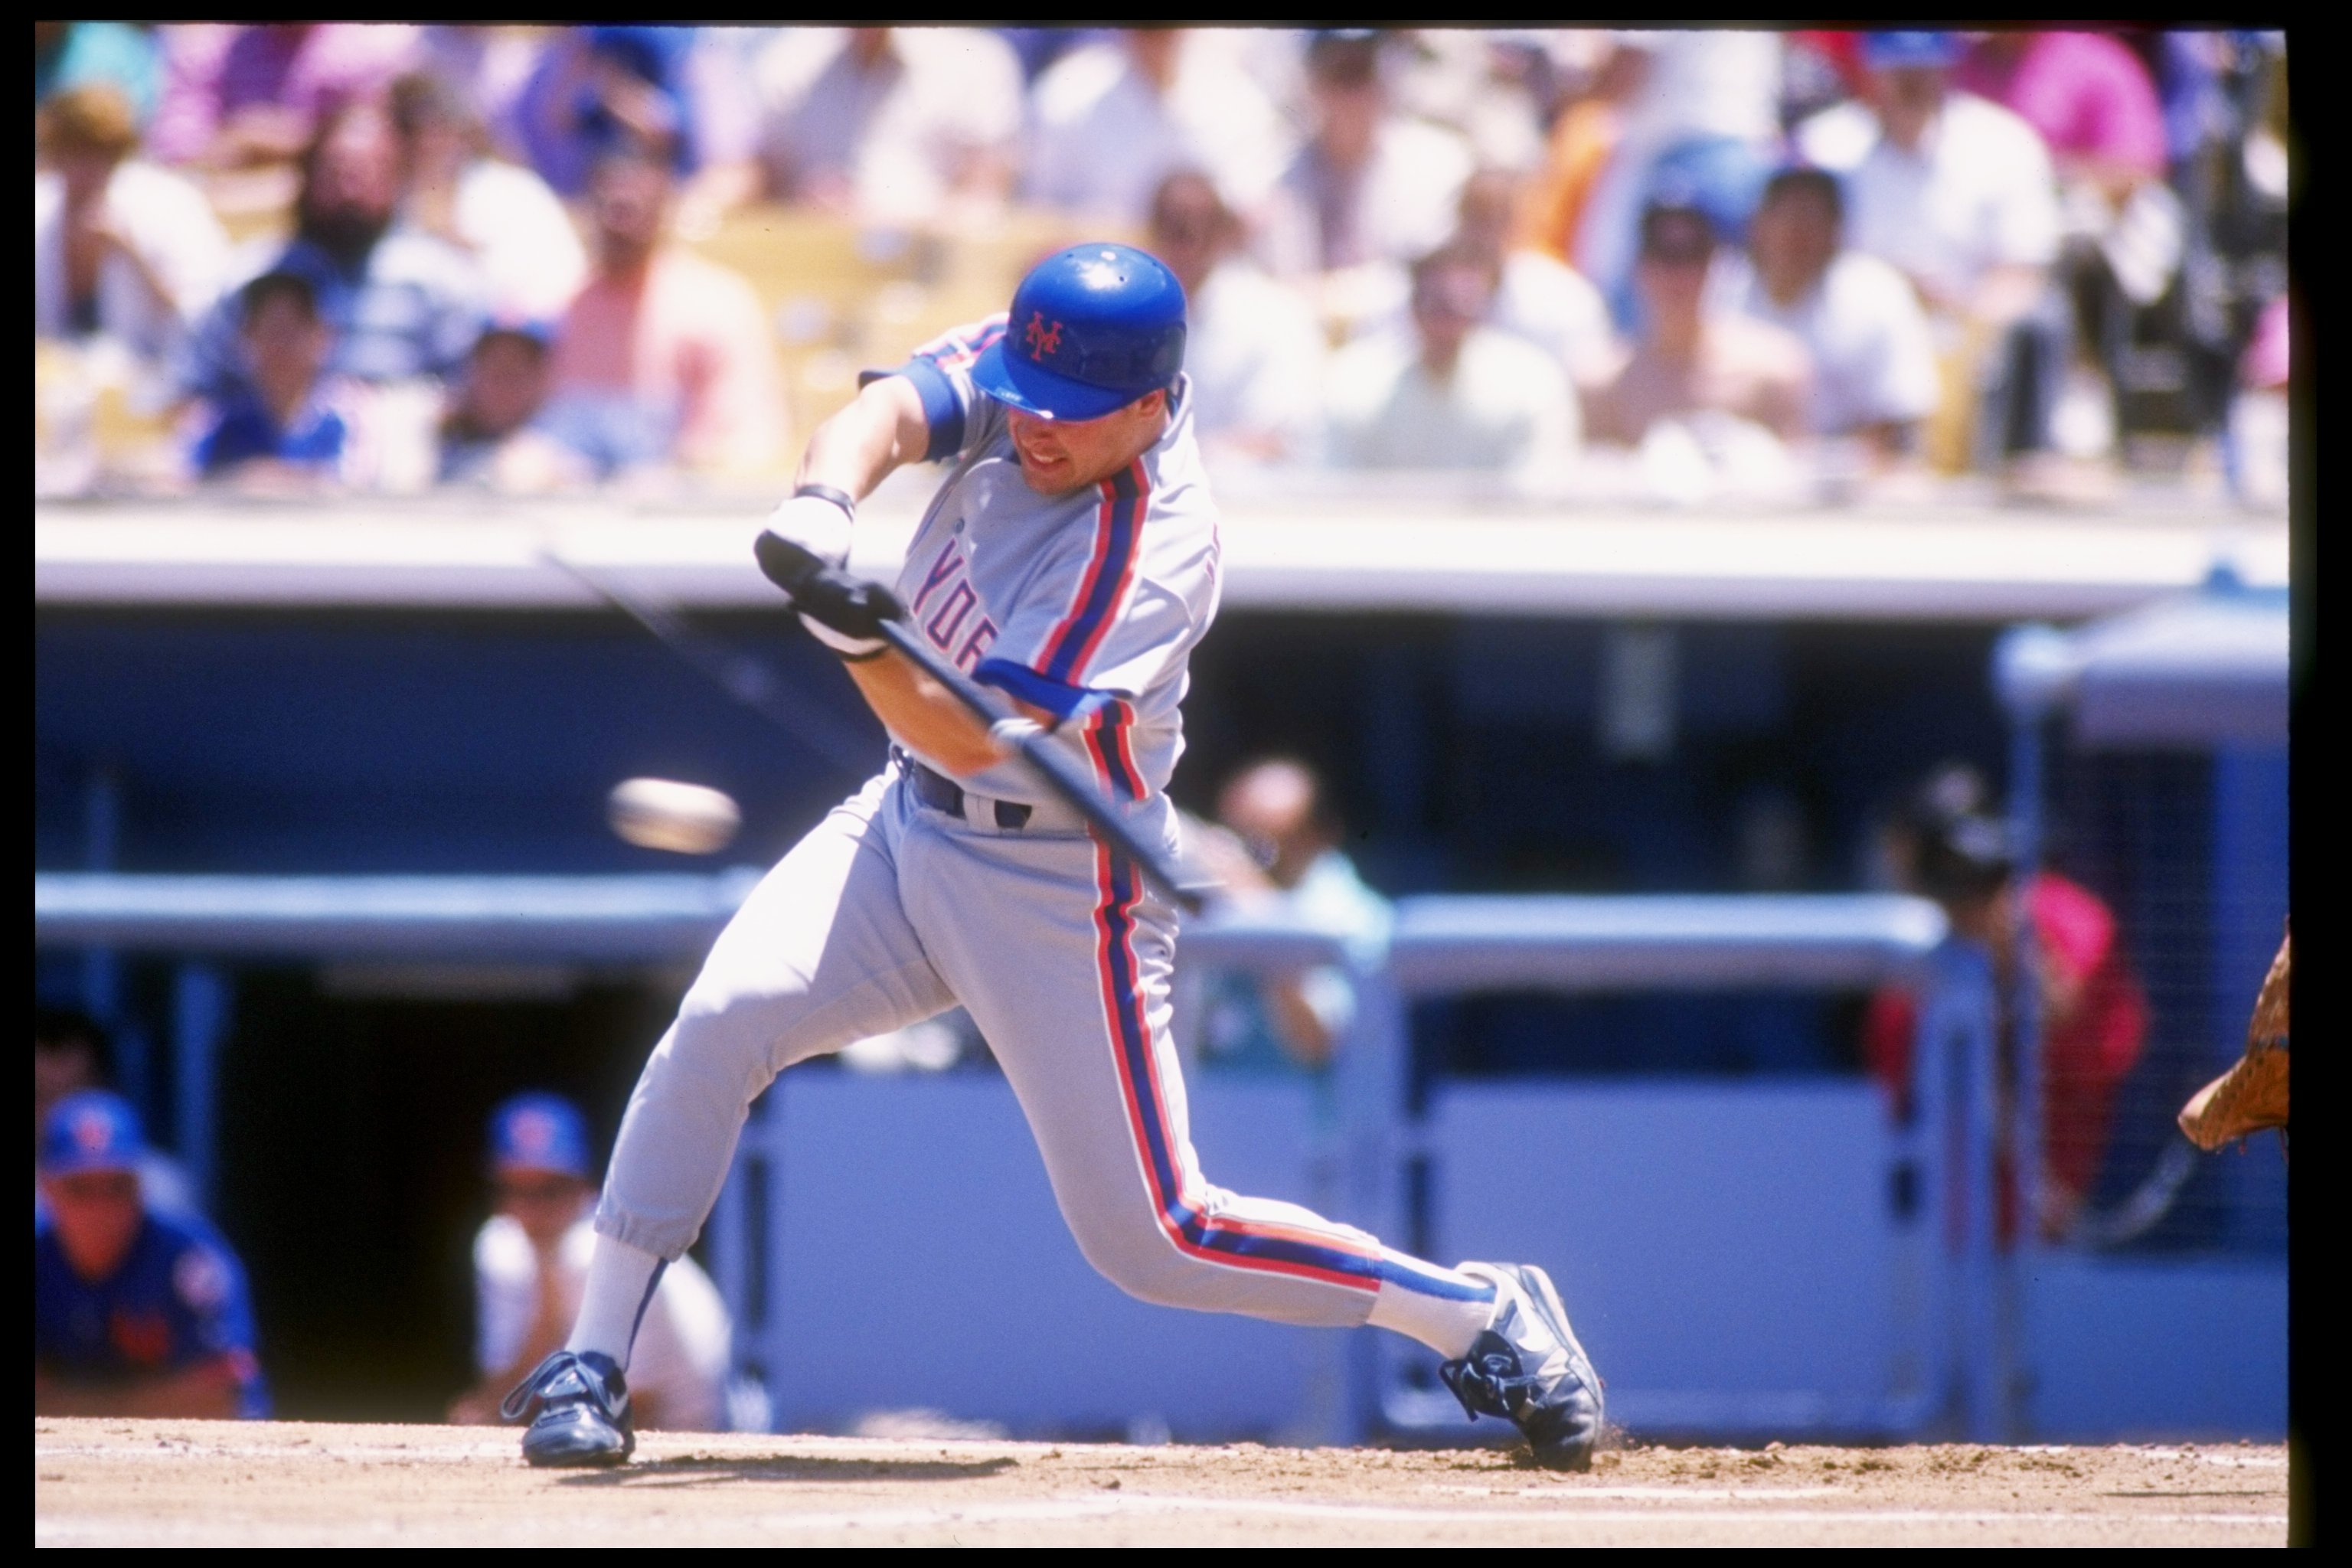 Whatever Happened to Gregg Jefferies, the Hyped-Up New York Mets Phenom?